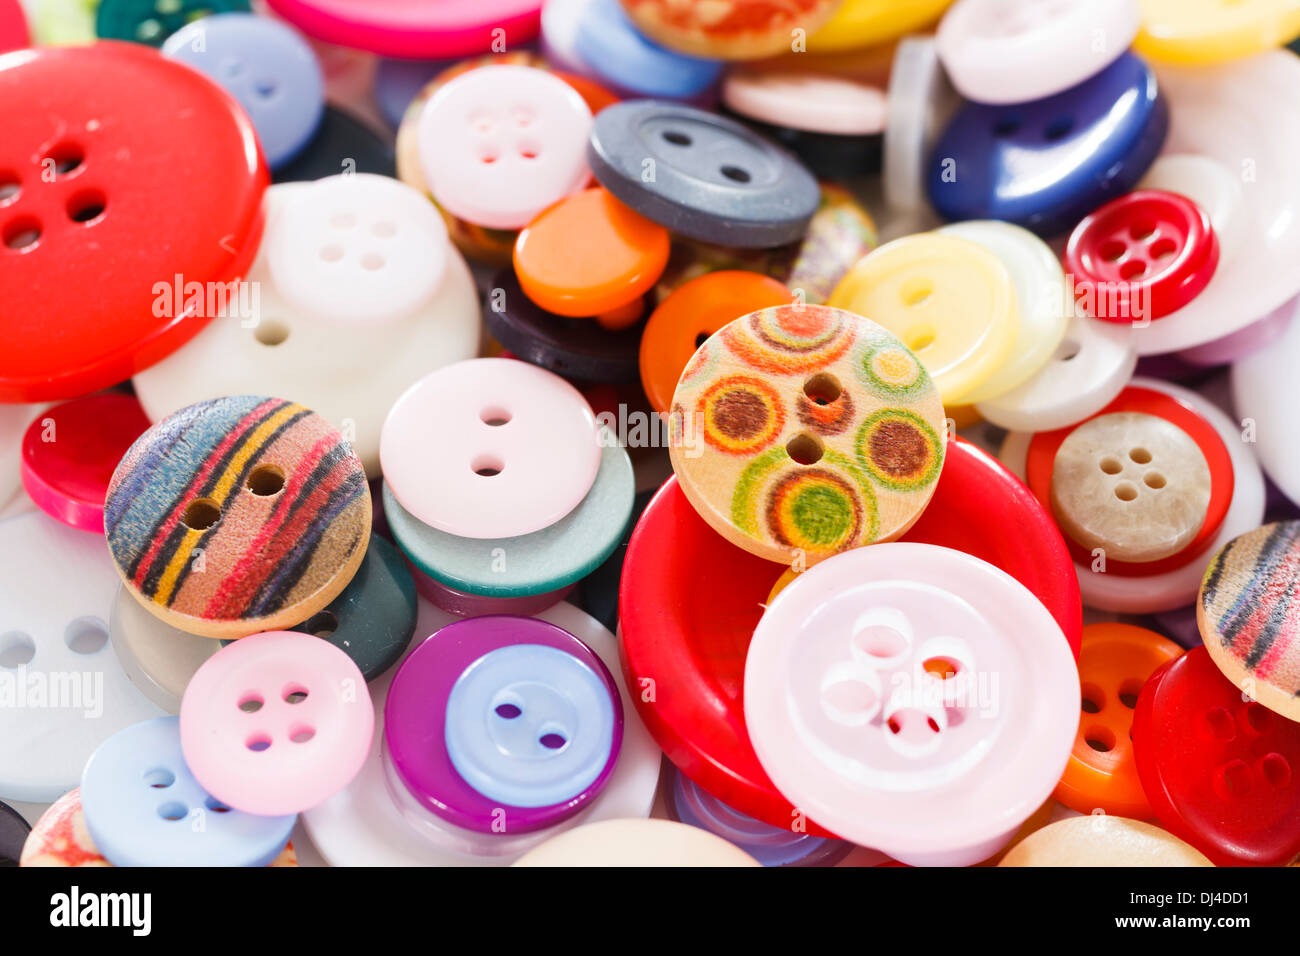 Pile of buttons close up Stock Photo